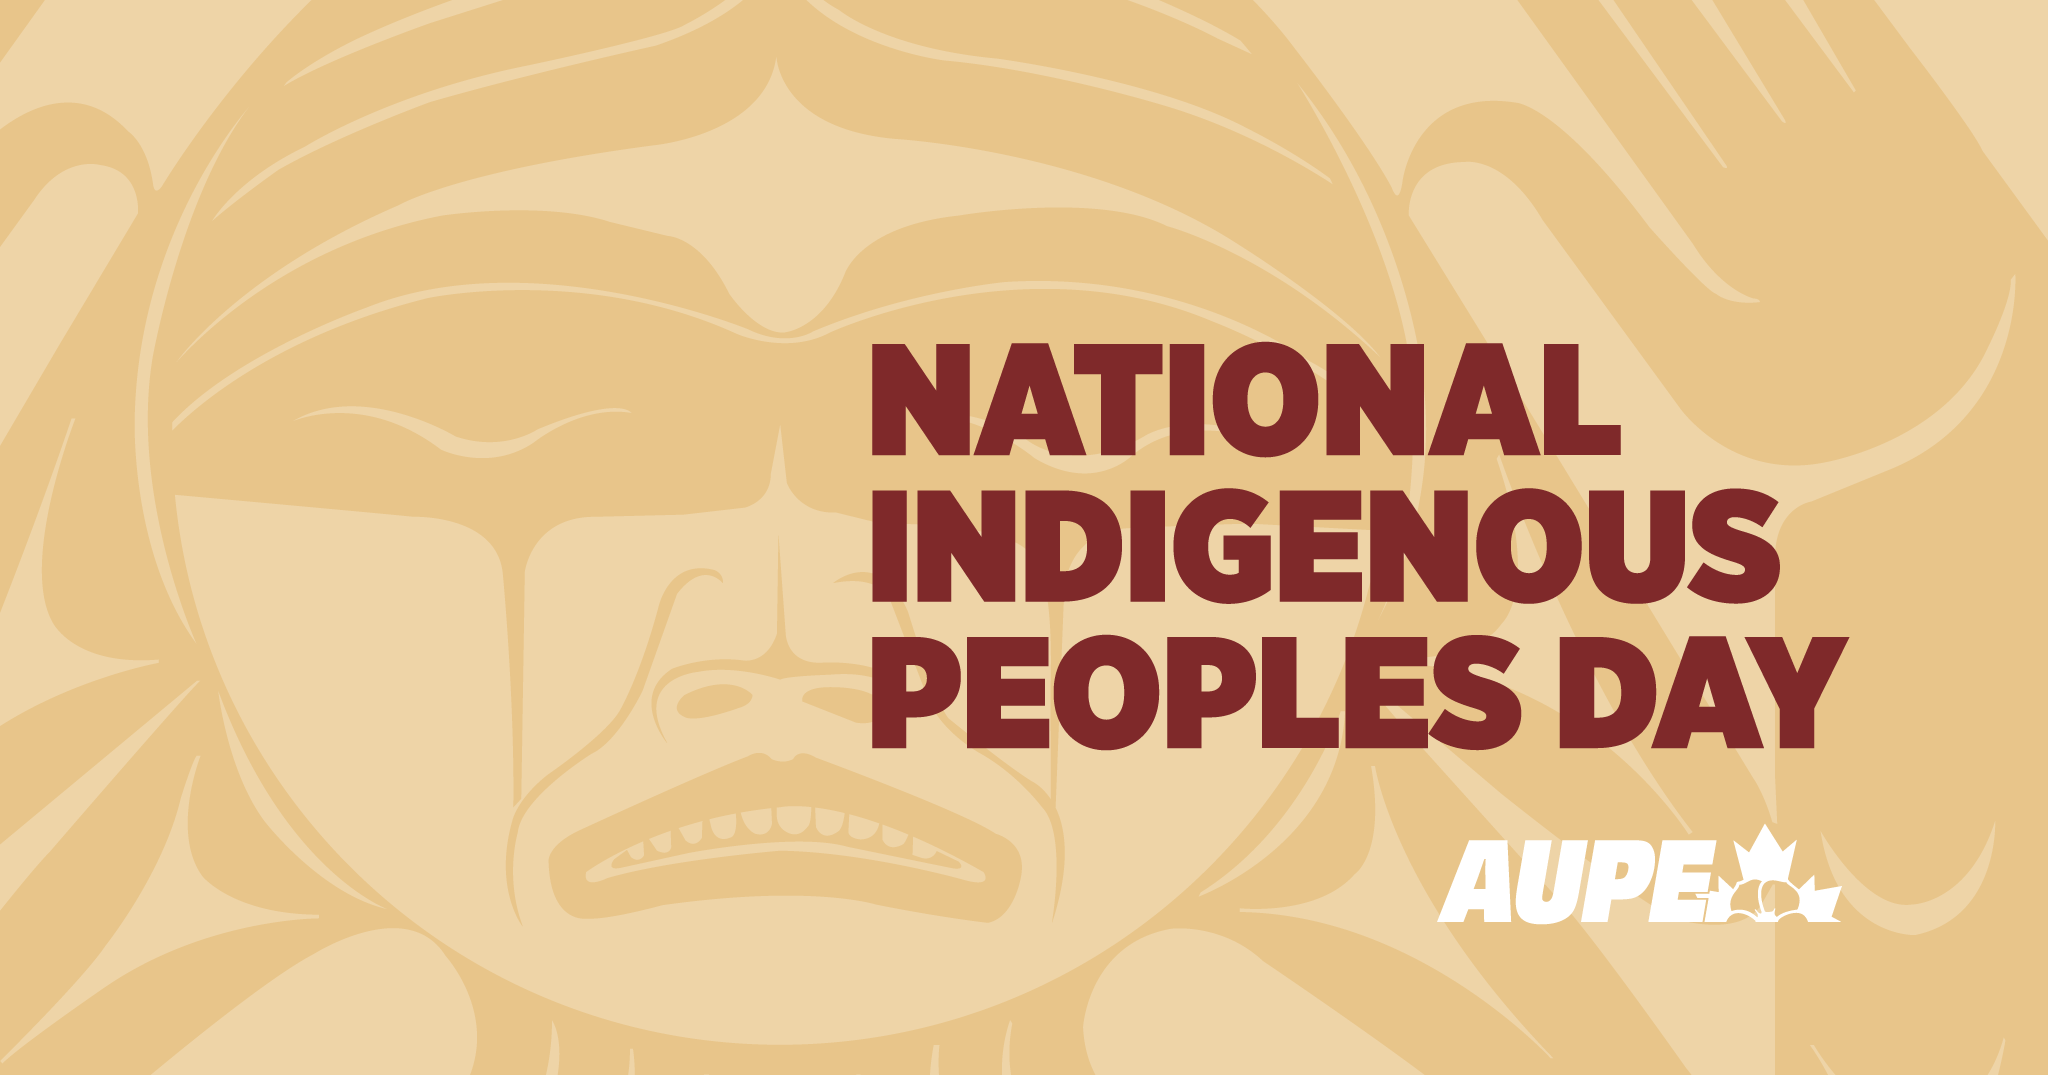 Statement from AUPE: National Indigenous Peoples Day | AUPE